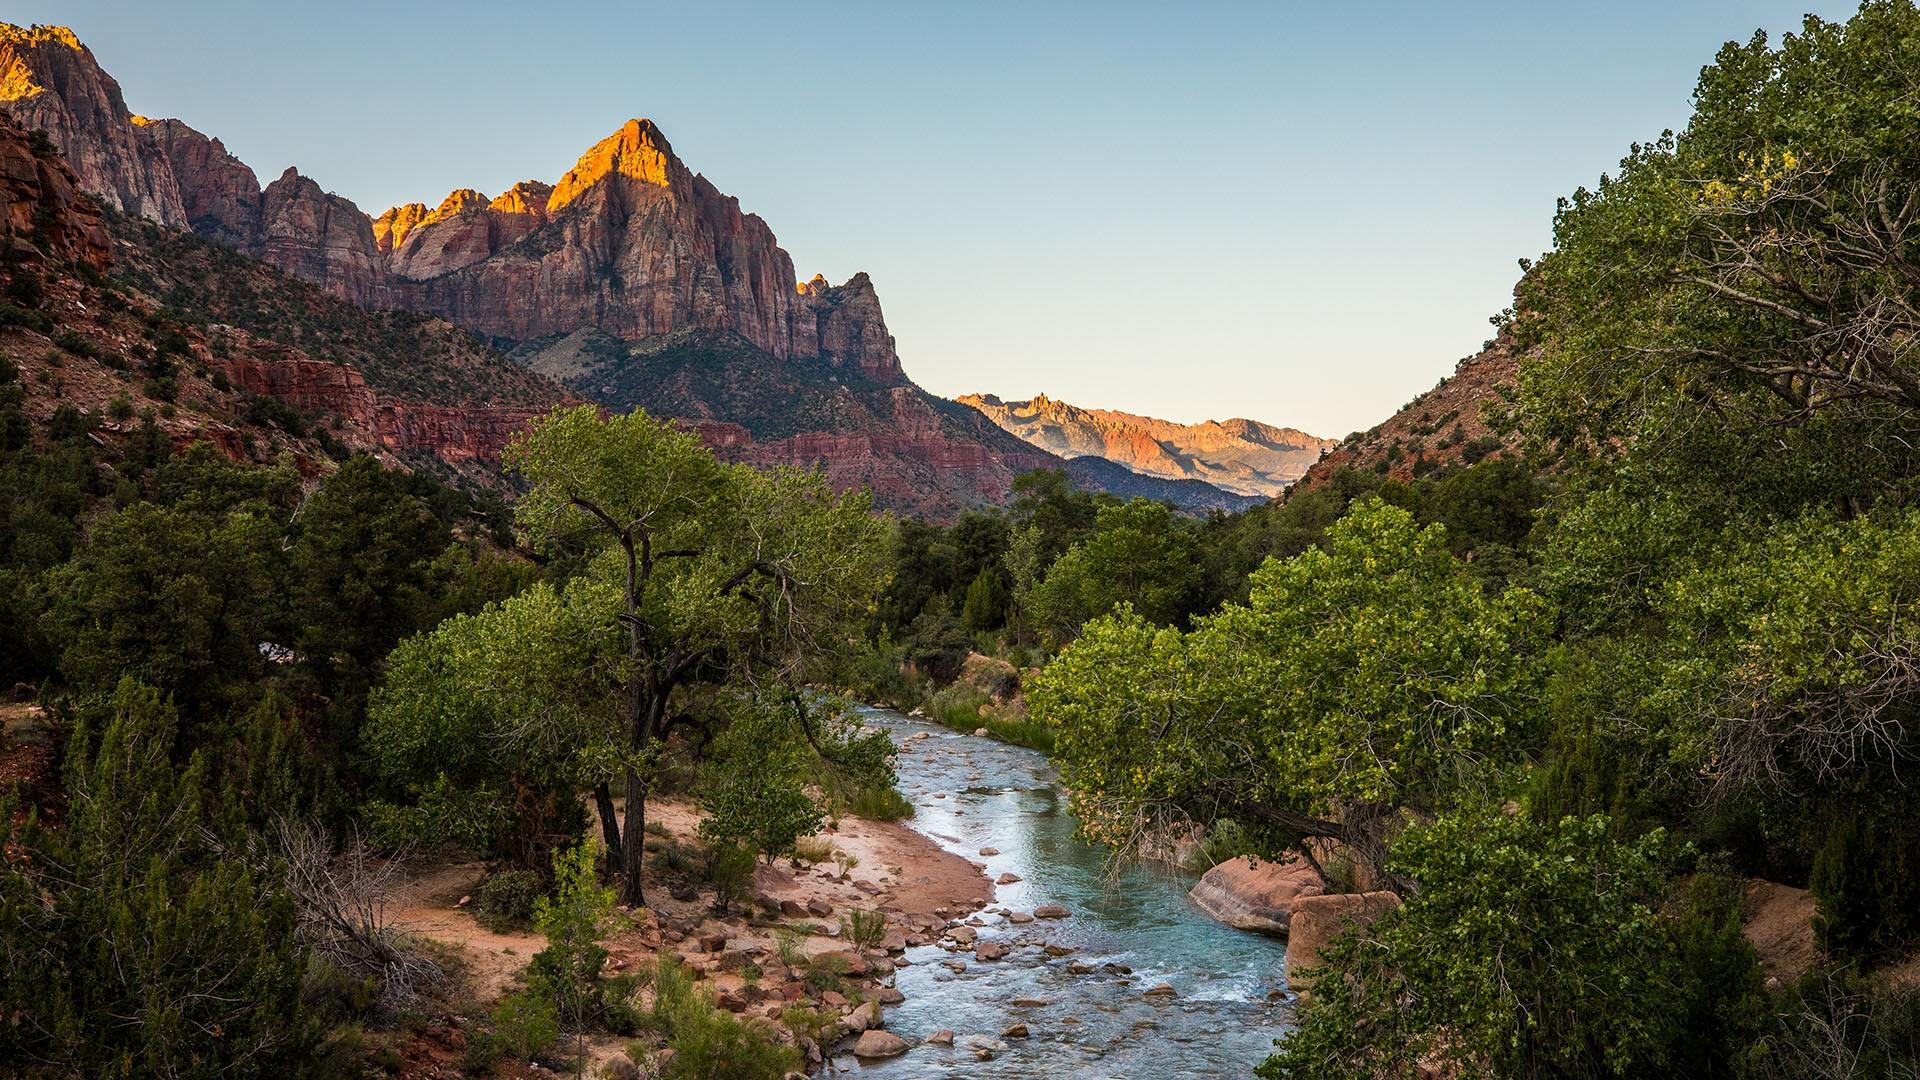 The Watchman and Virgin River at sunrise, Zion National Park